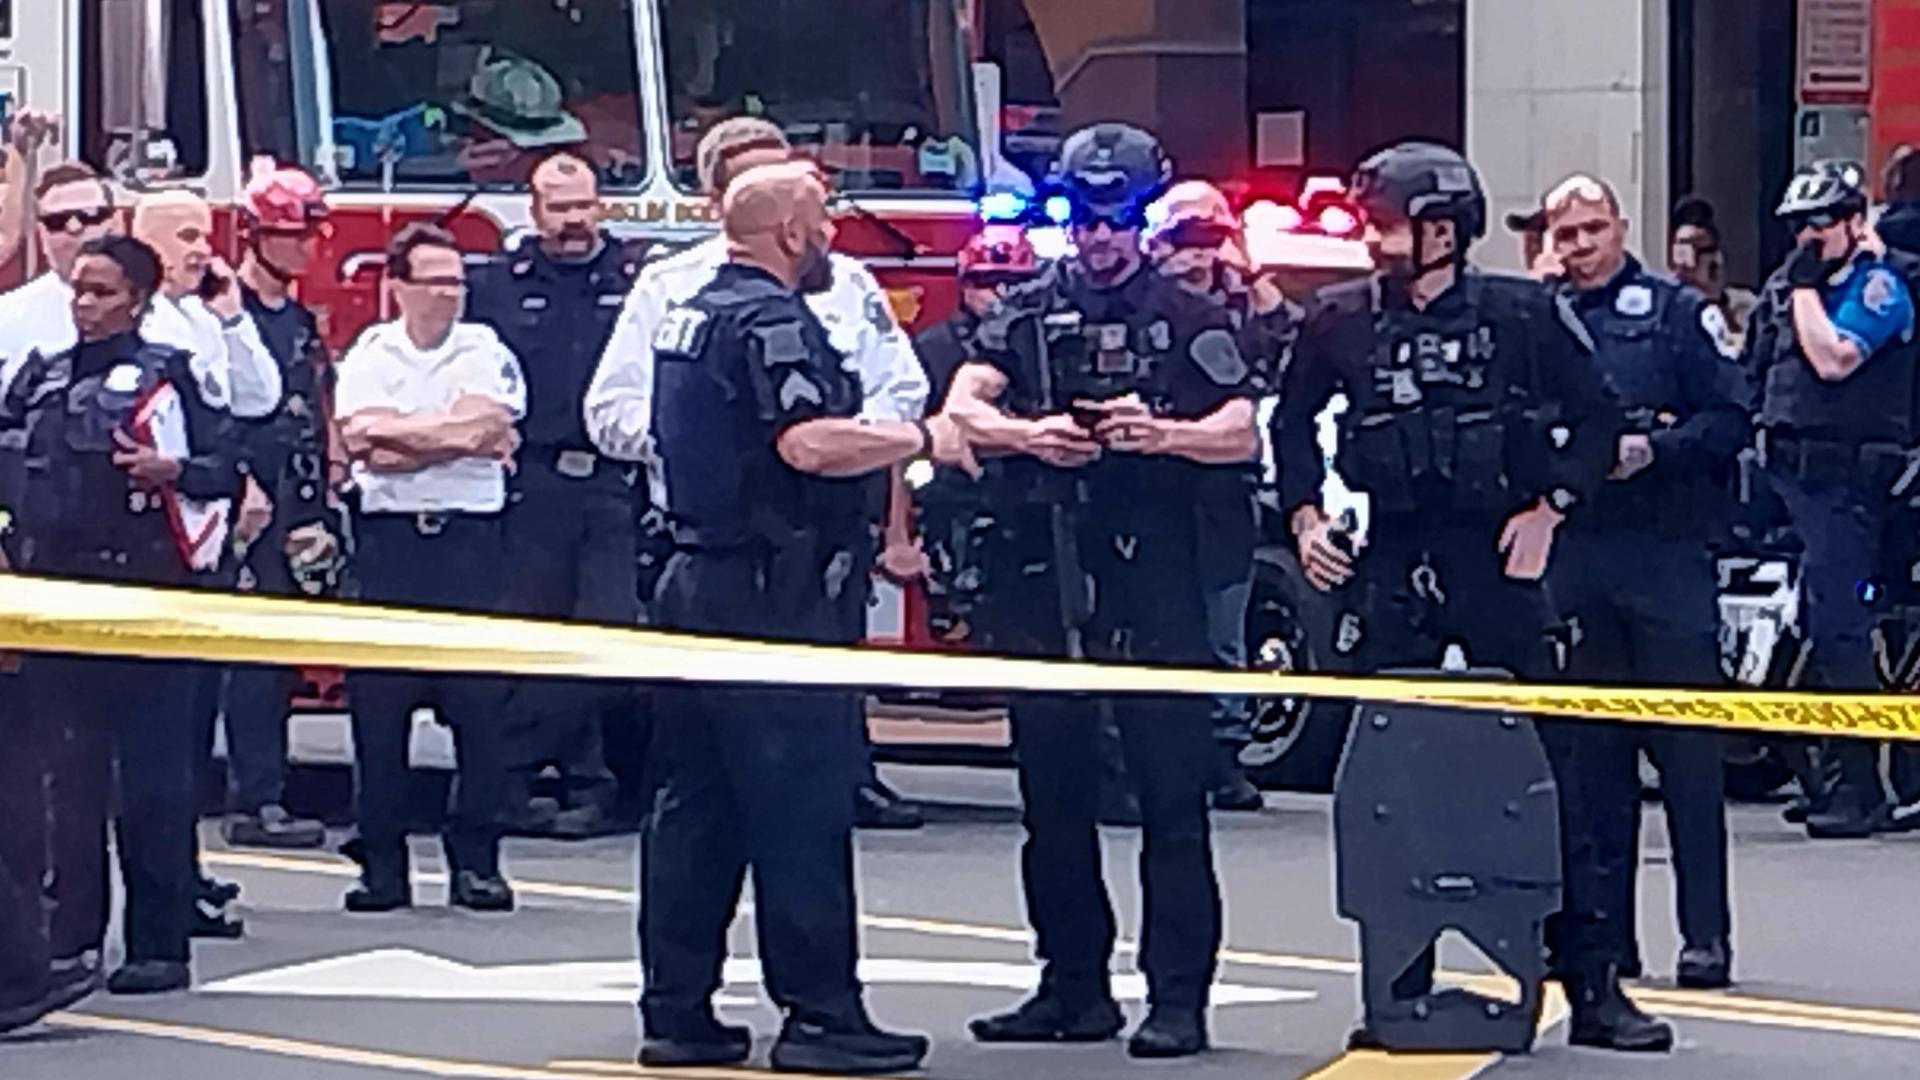 The barricade situation unfolded shortly before 3:15 p.m. along H Street, NW.